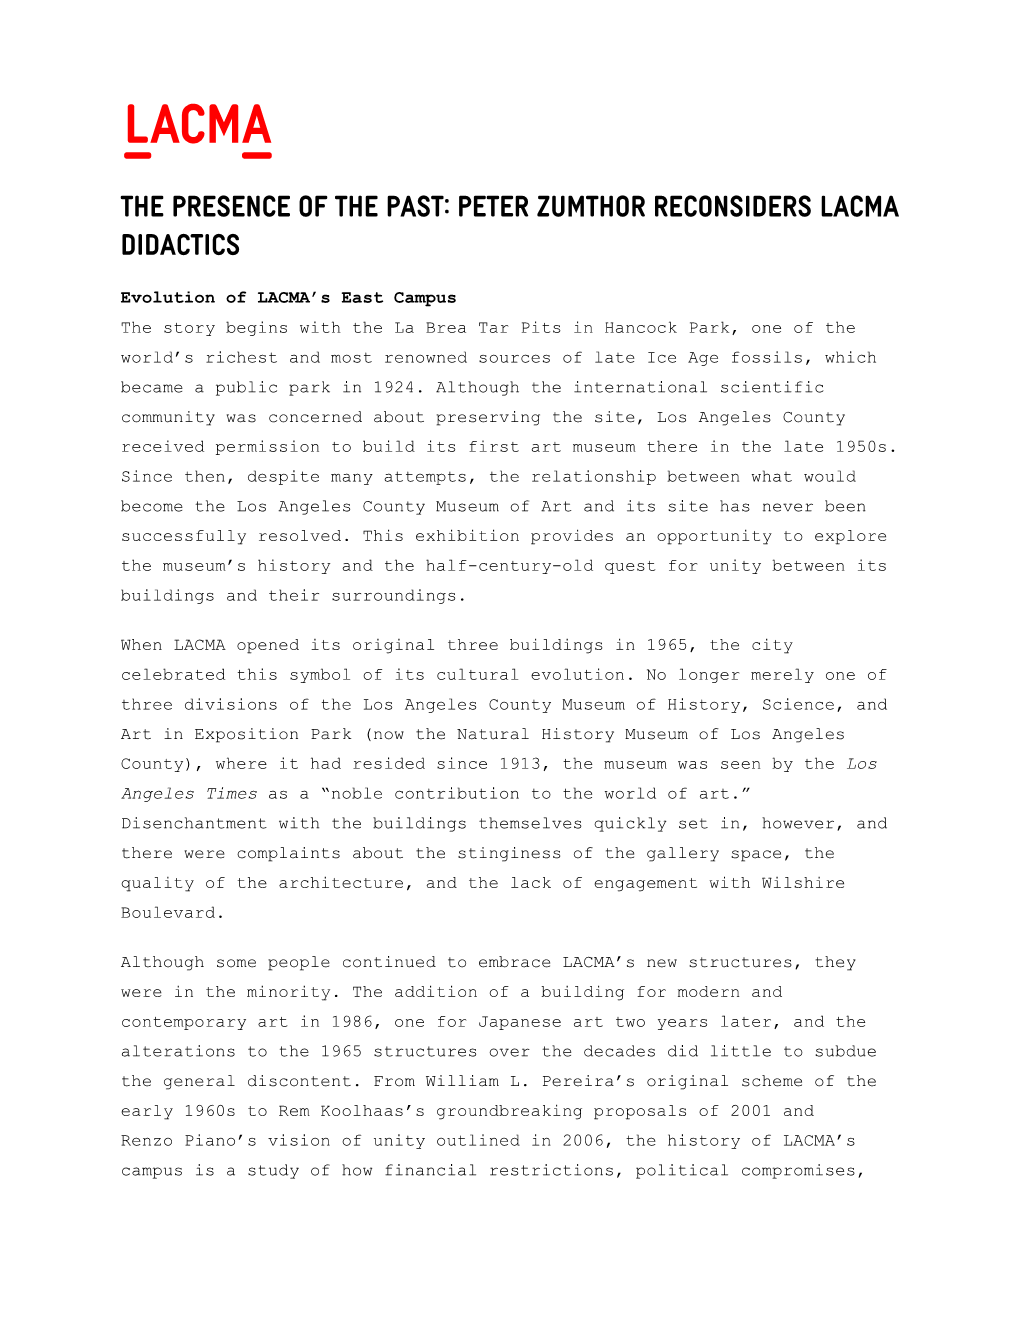 The Presence of the Past: Peter Zumthor Reconsiders LACMA Didactics